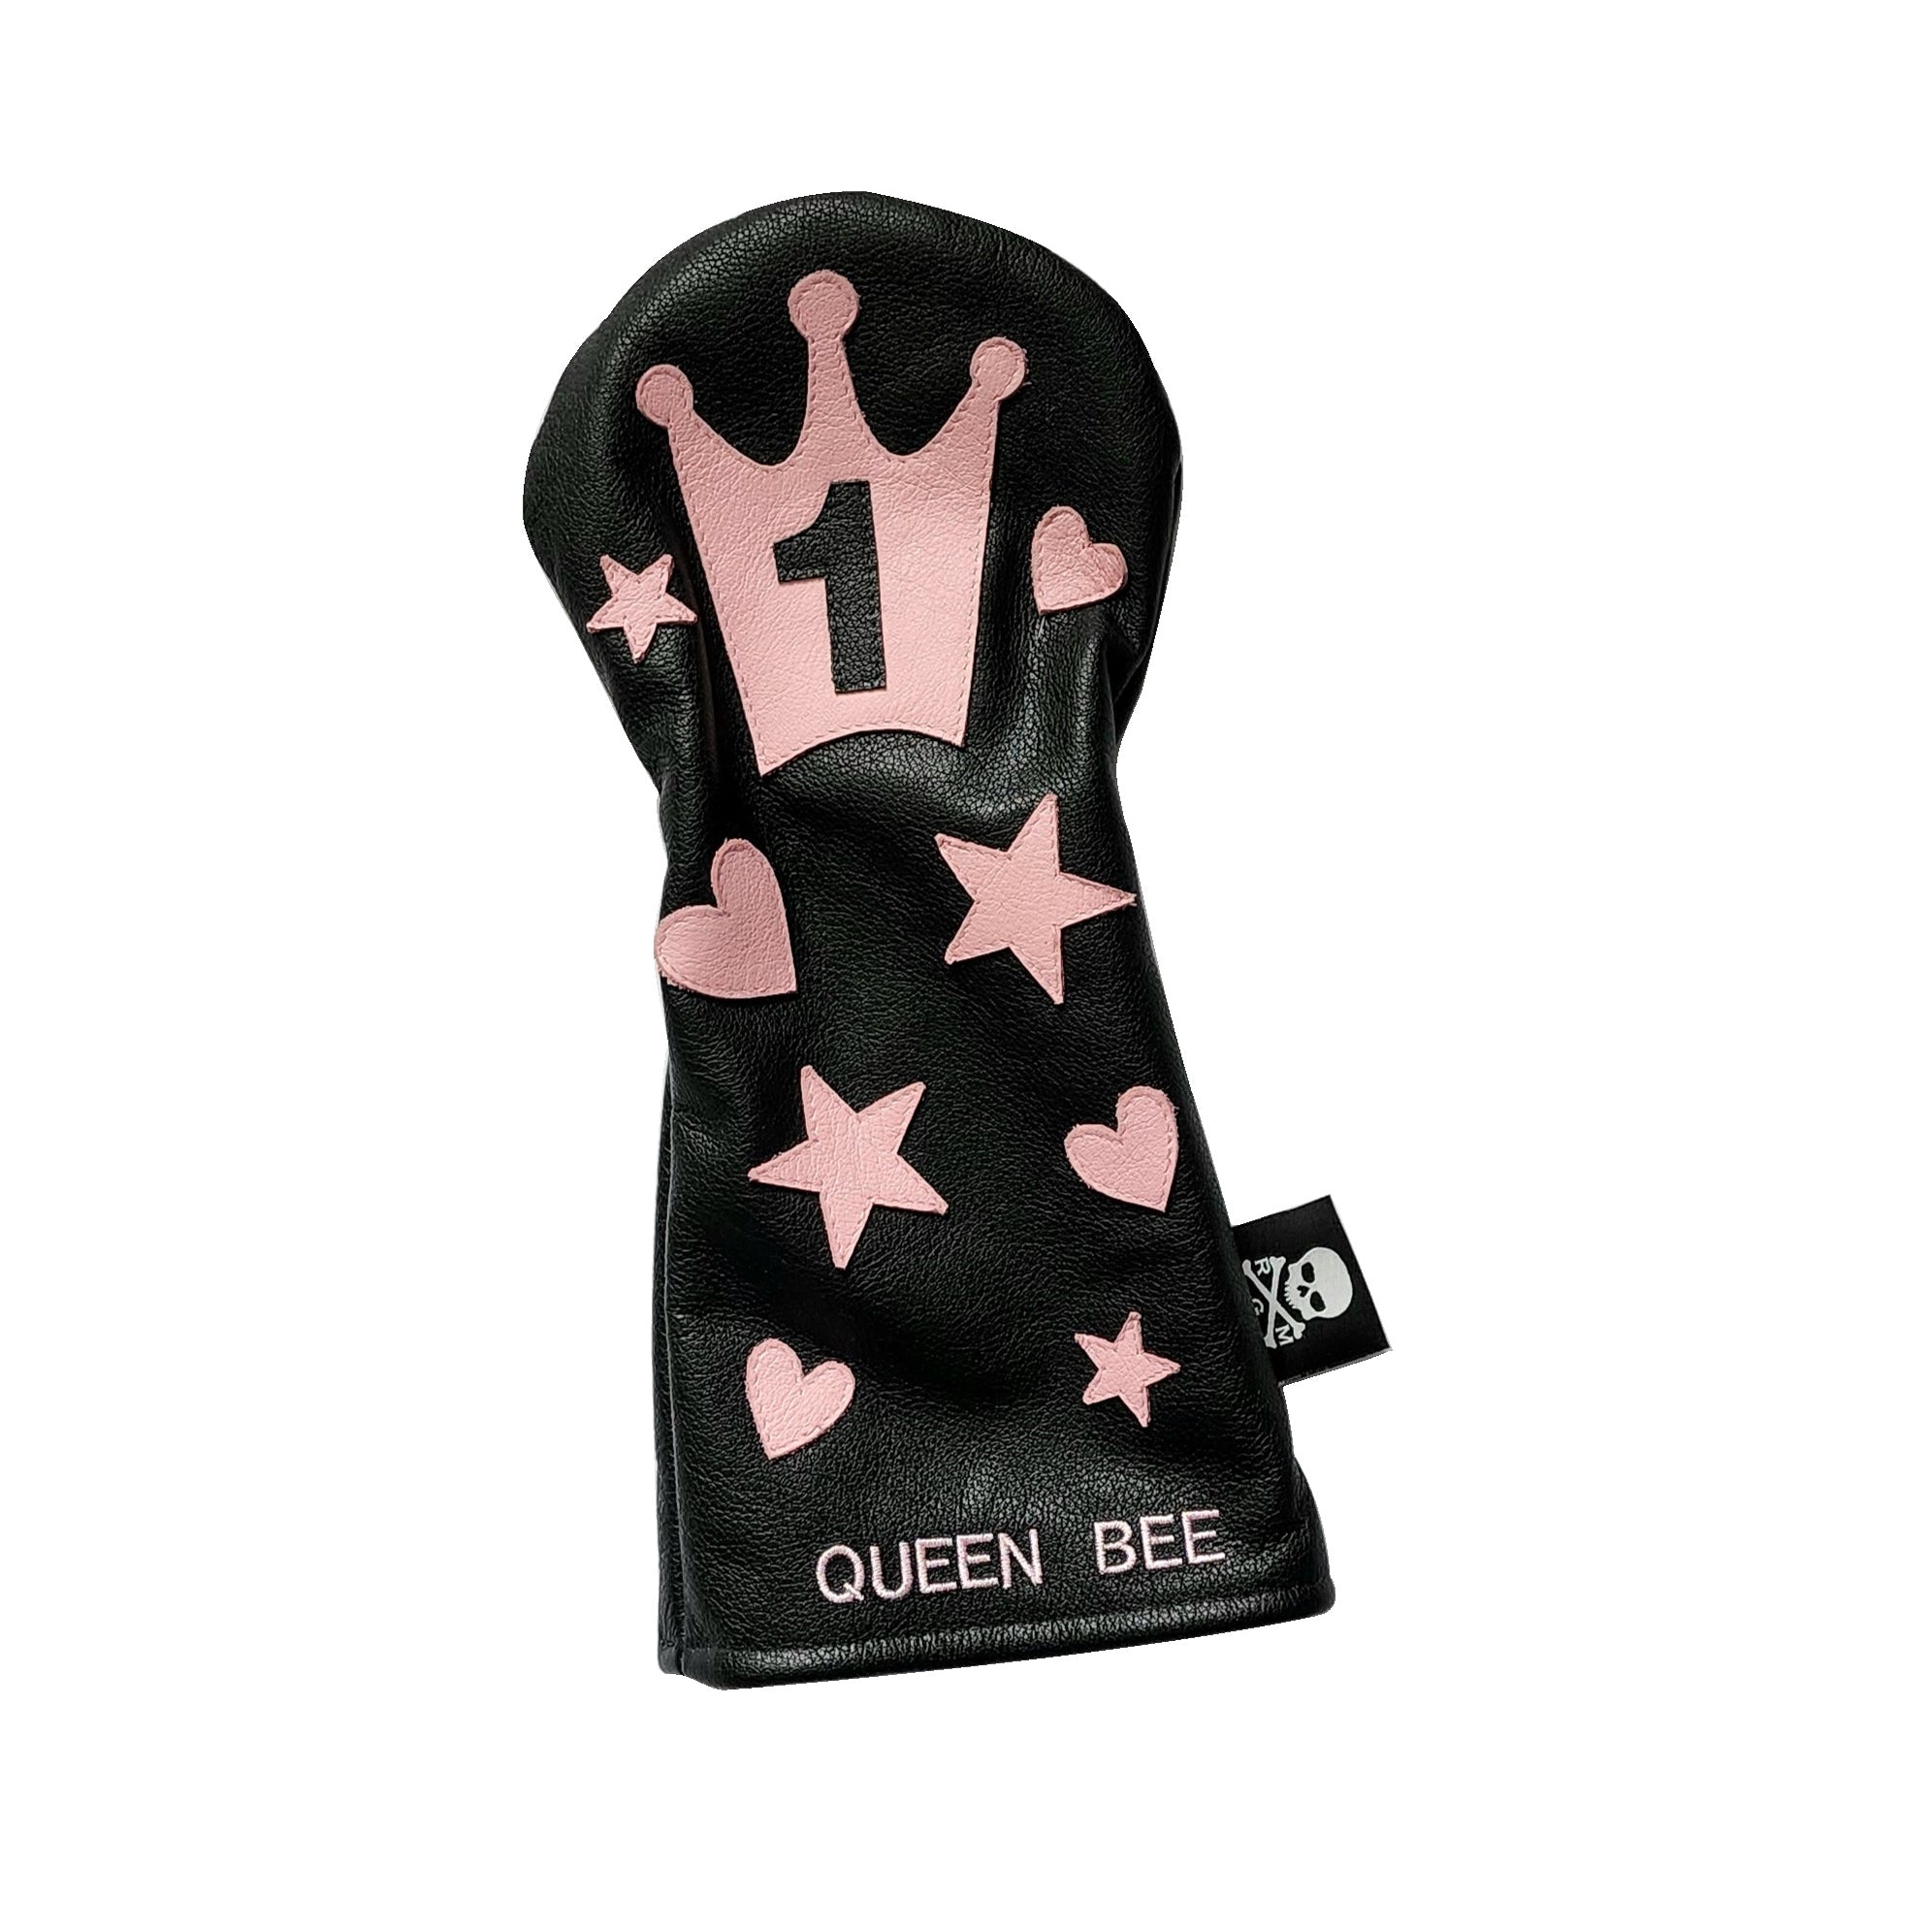 One-Of-A-Kind! Queen Bee Driver Headcover - Robert Mark Golf